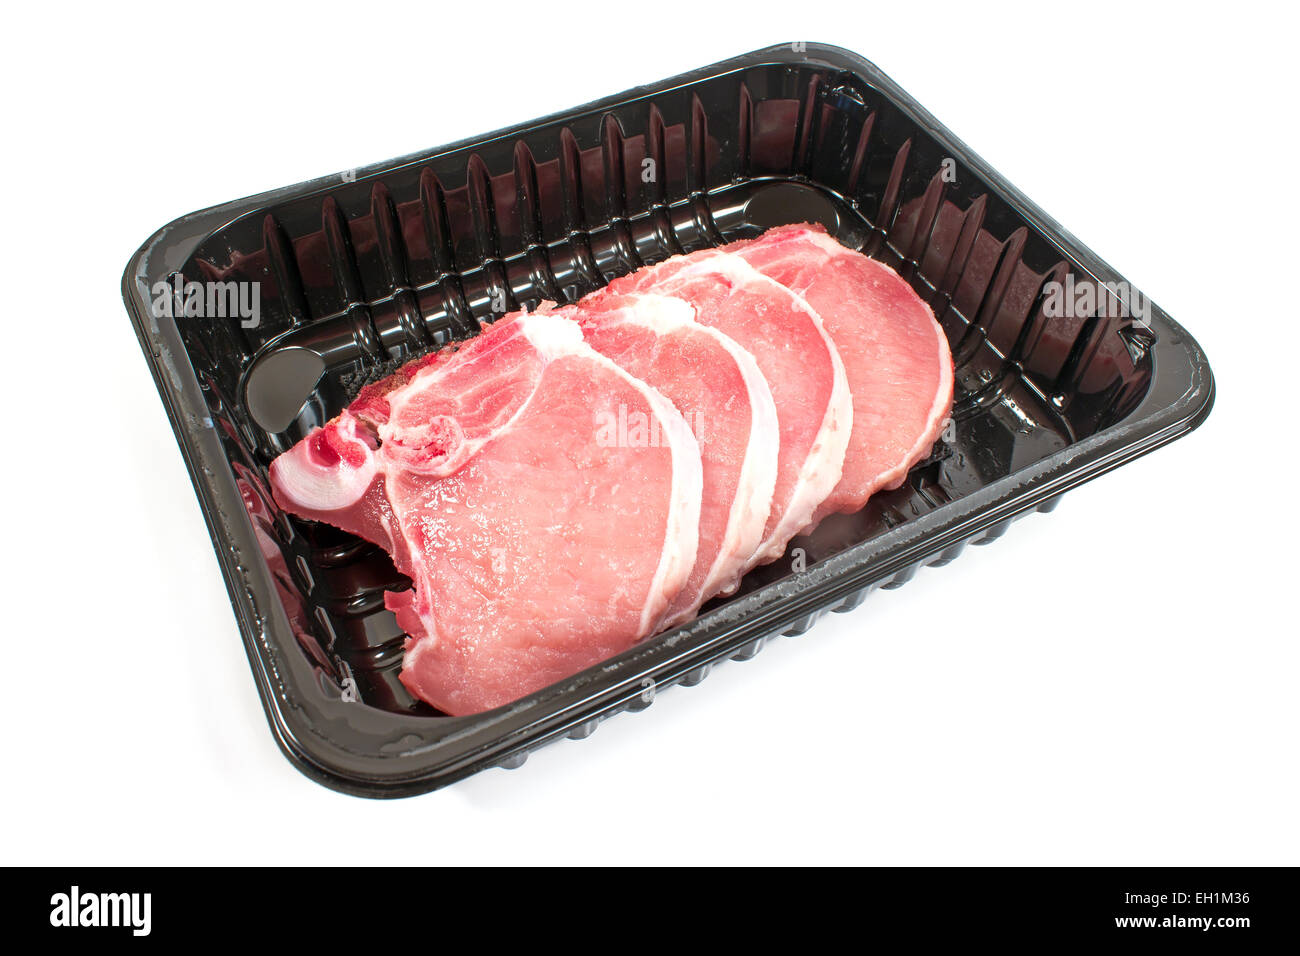 Pork chop meat in plastic bowl isolated on white Stock Photo